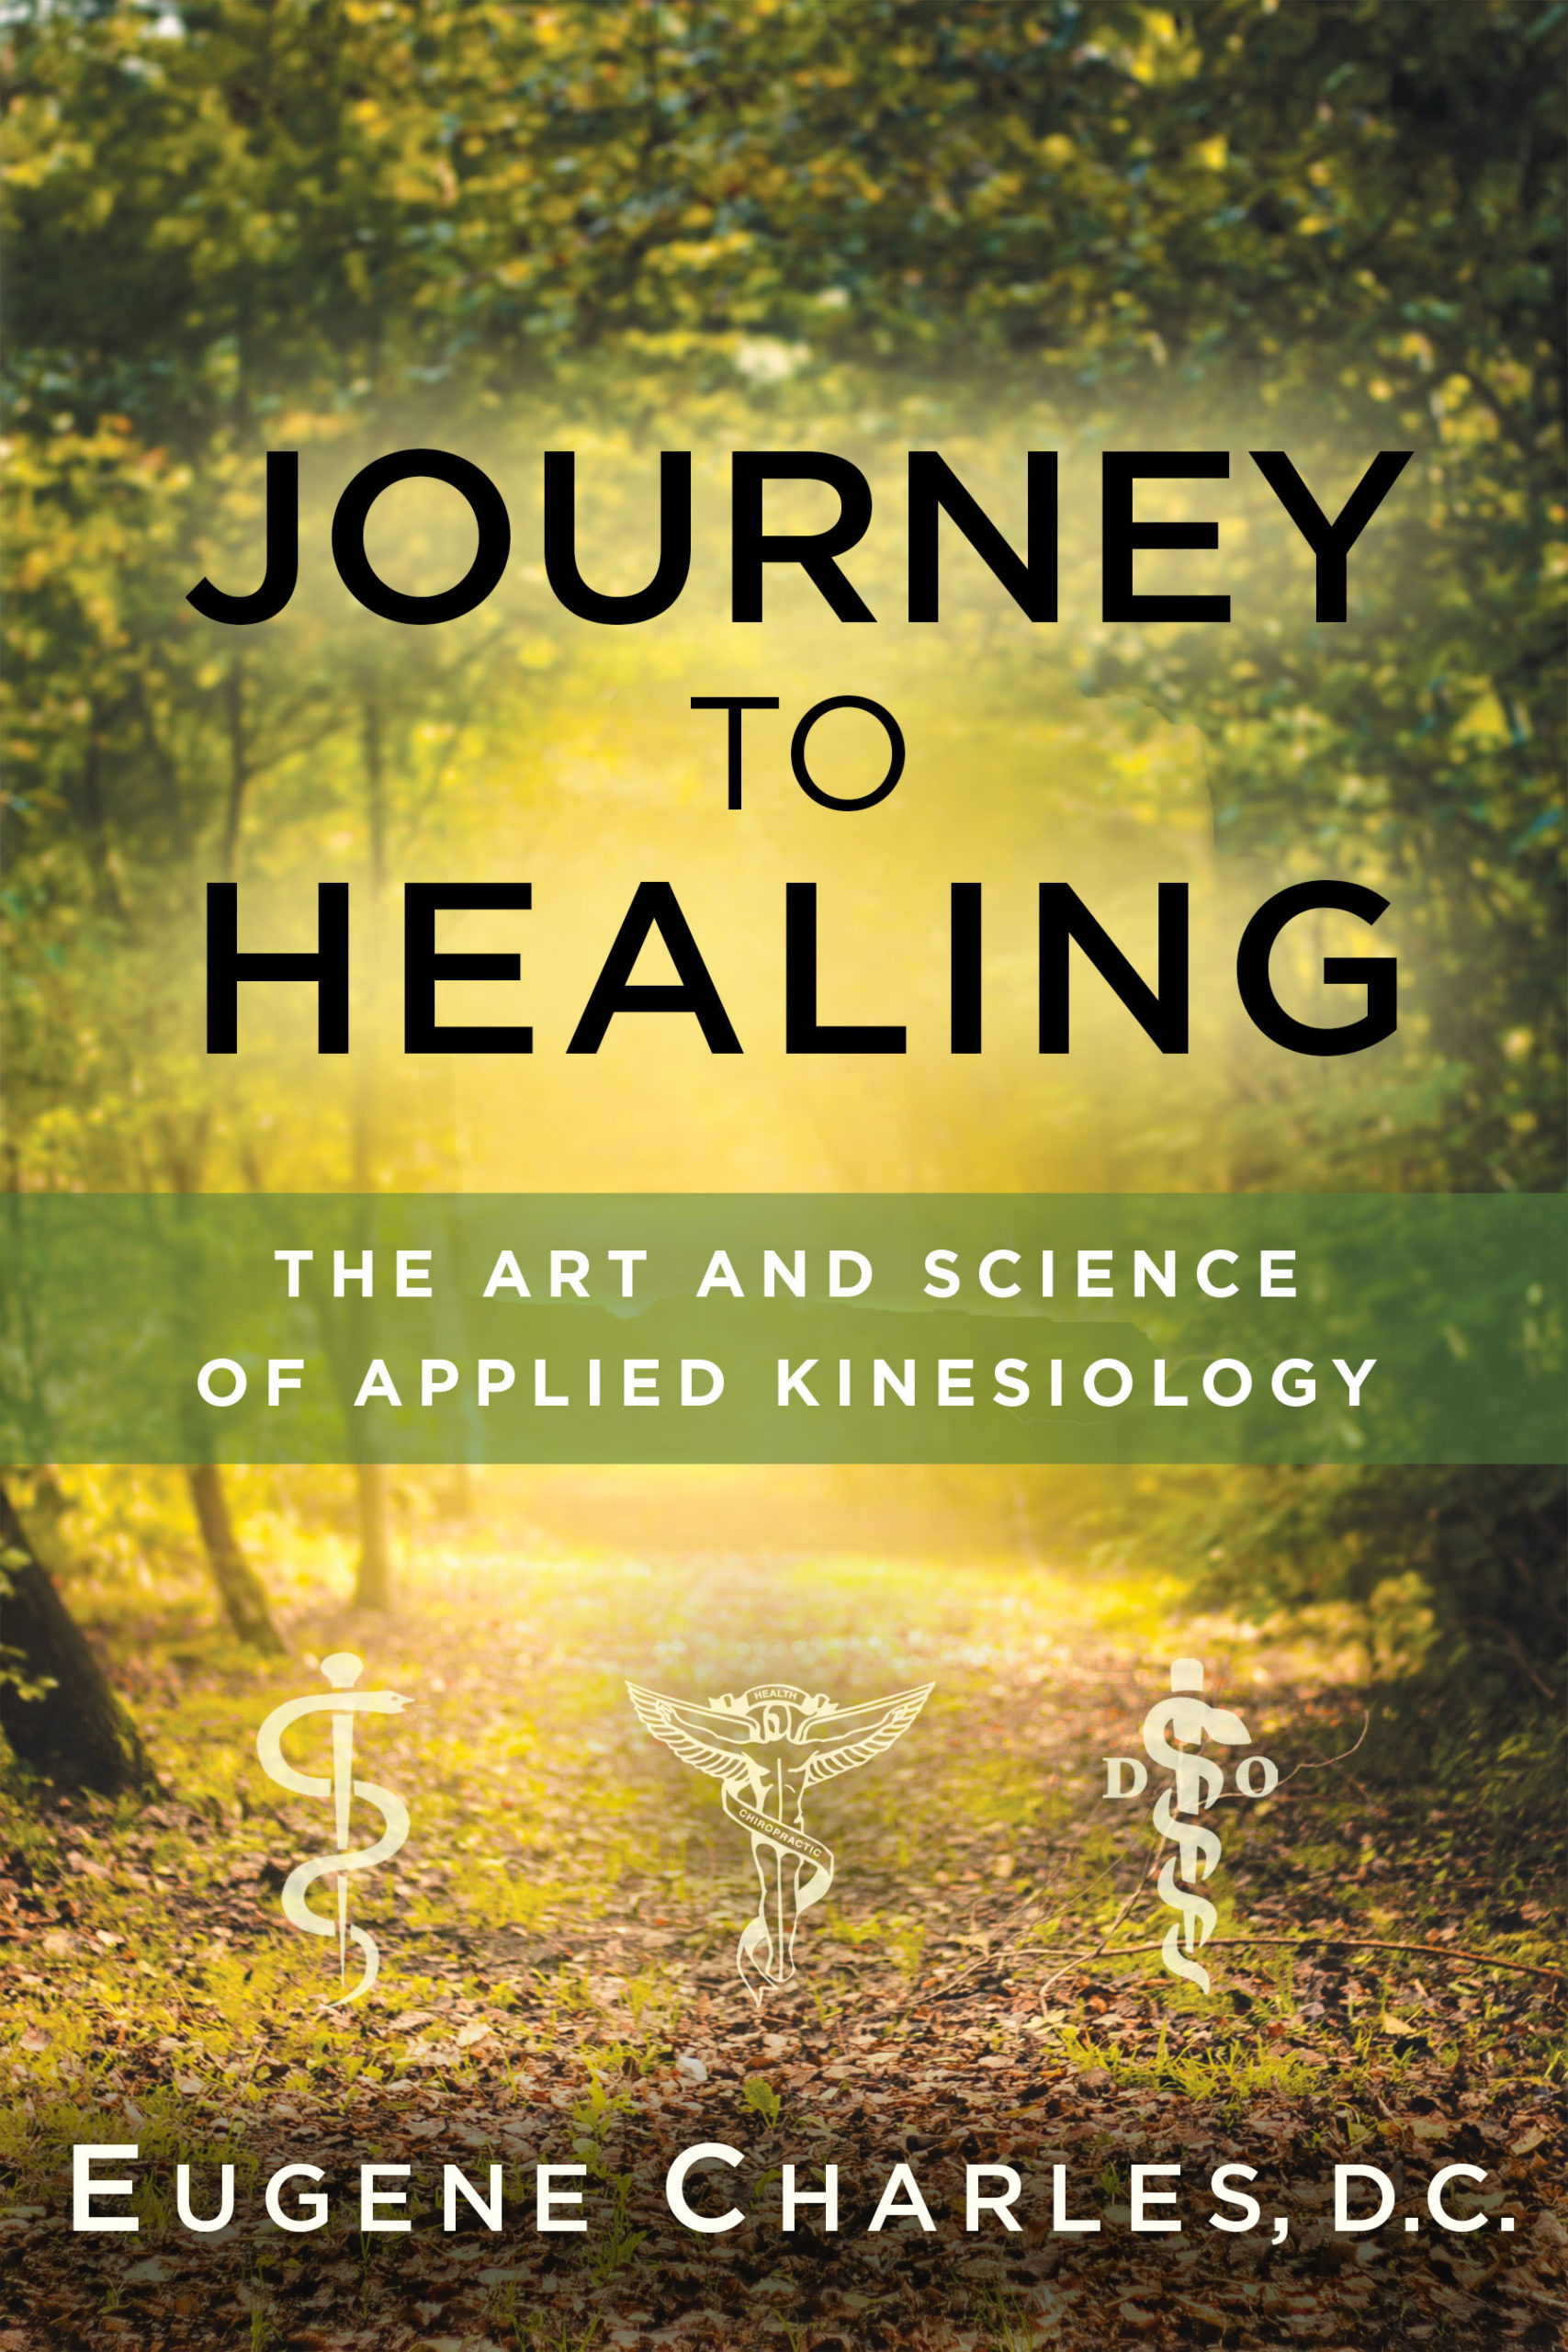 Journey To Healing—The Art and Science of Applied Kinesiology by Dr. Eugene Charles